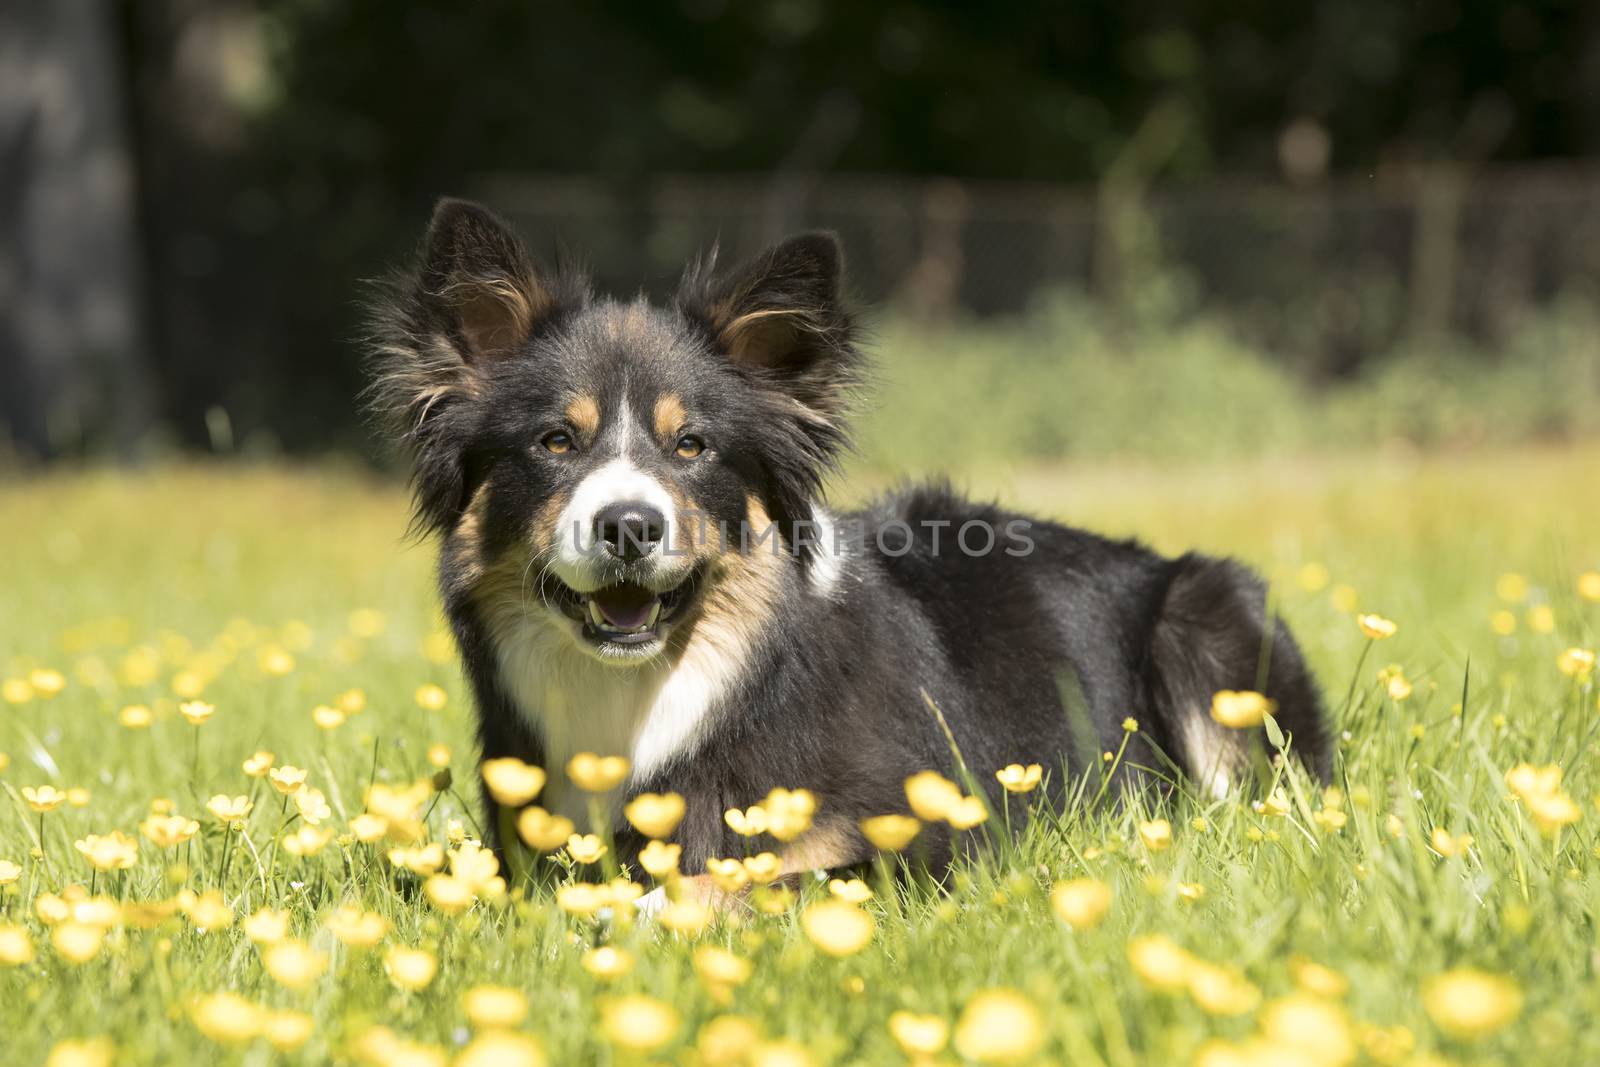 Dog, Border Collie, lying in grass, yellow flowers